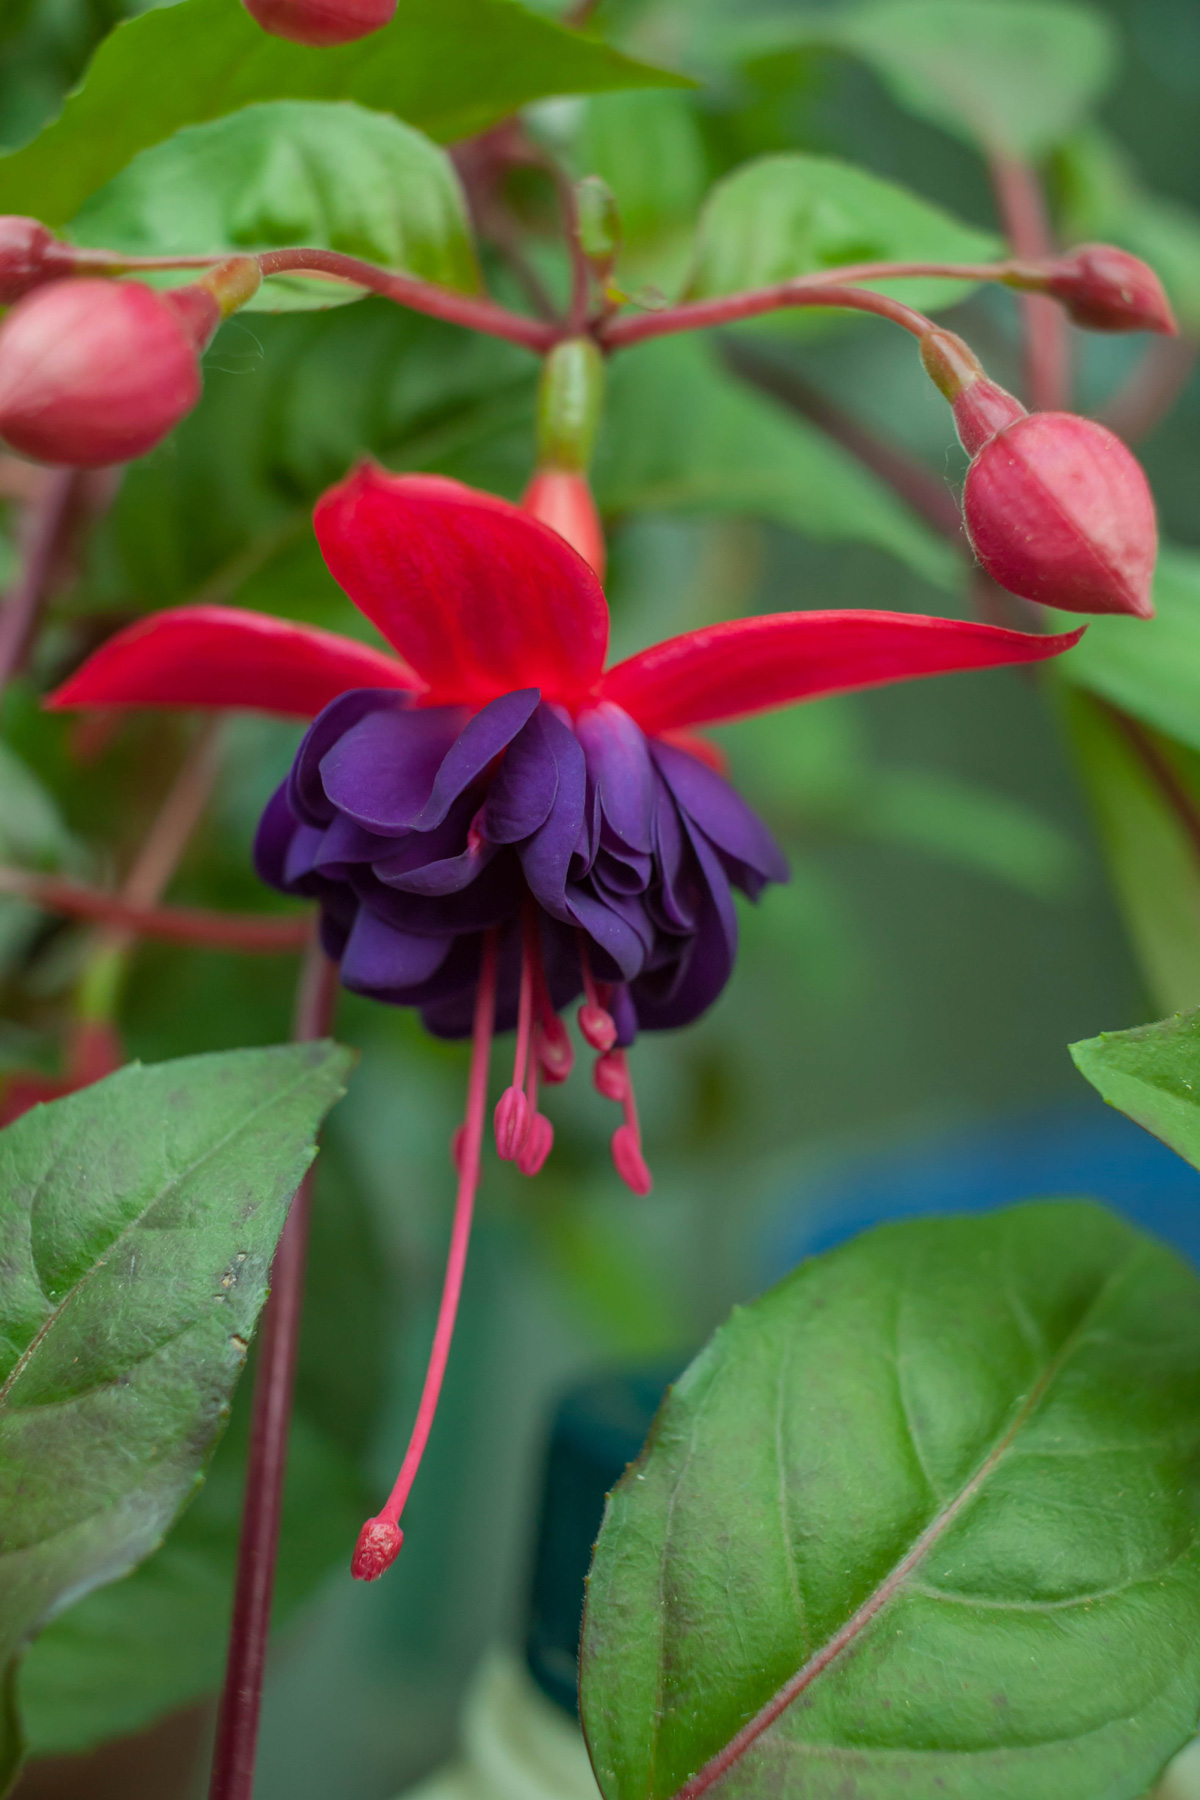 Fuchsia plant, beautiful dark purple magenta flower blooming surrounded with green leaves and blurry background.